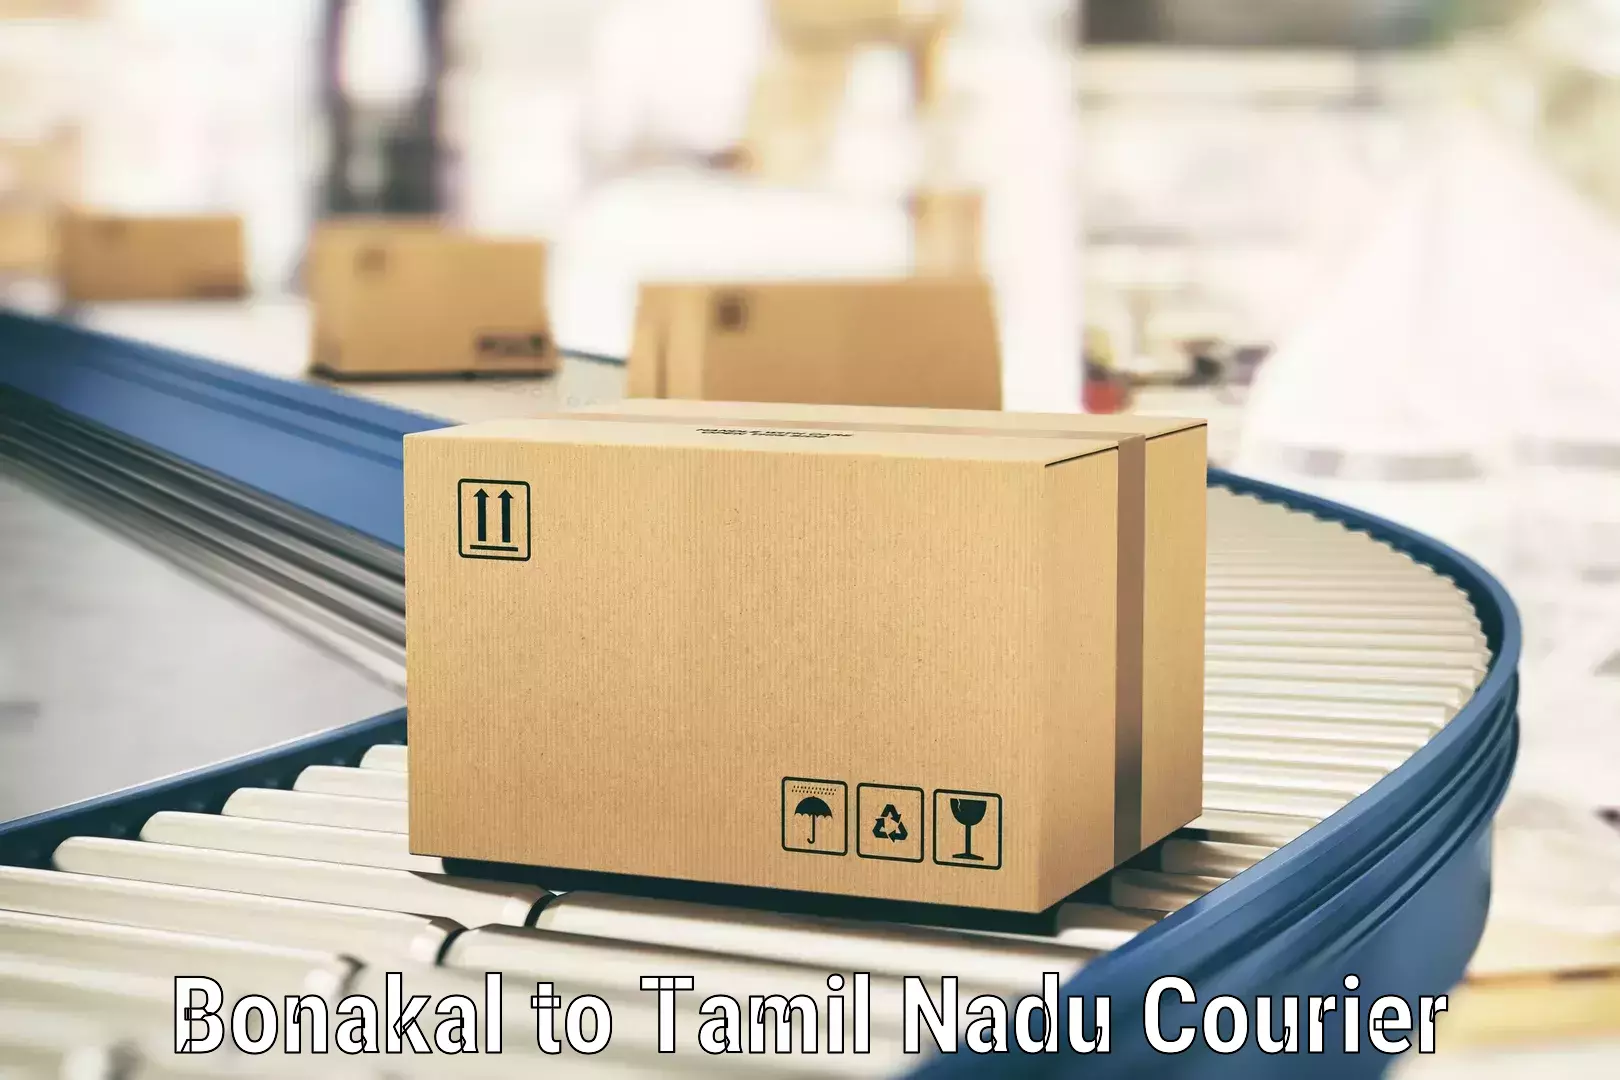 Global courier networks Bonakal to Tuticorin Port